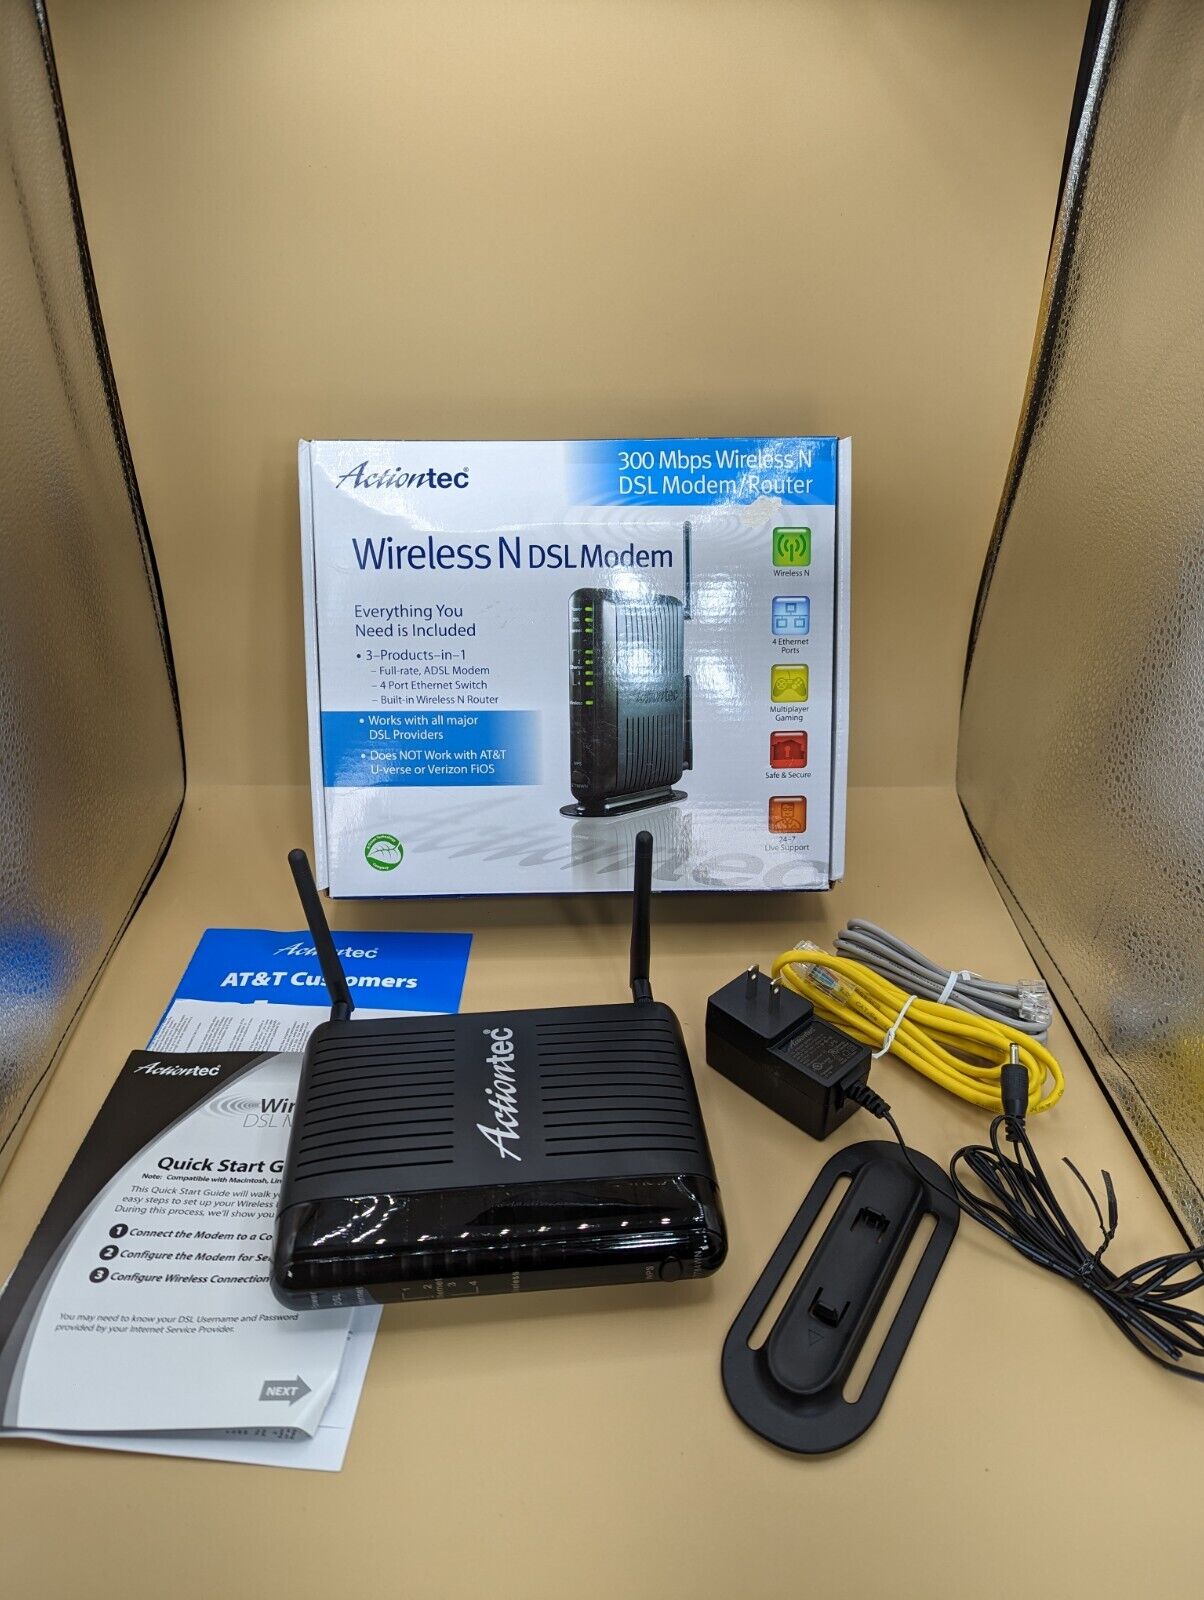 Actiontec GT784WN-01 Wireless N DSL Modem Router 300 Mbps WiFi TESTED